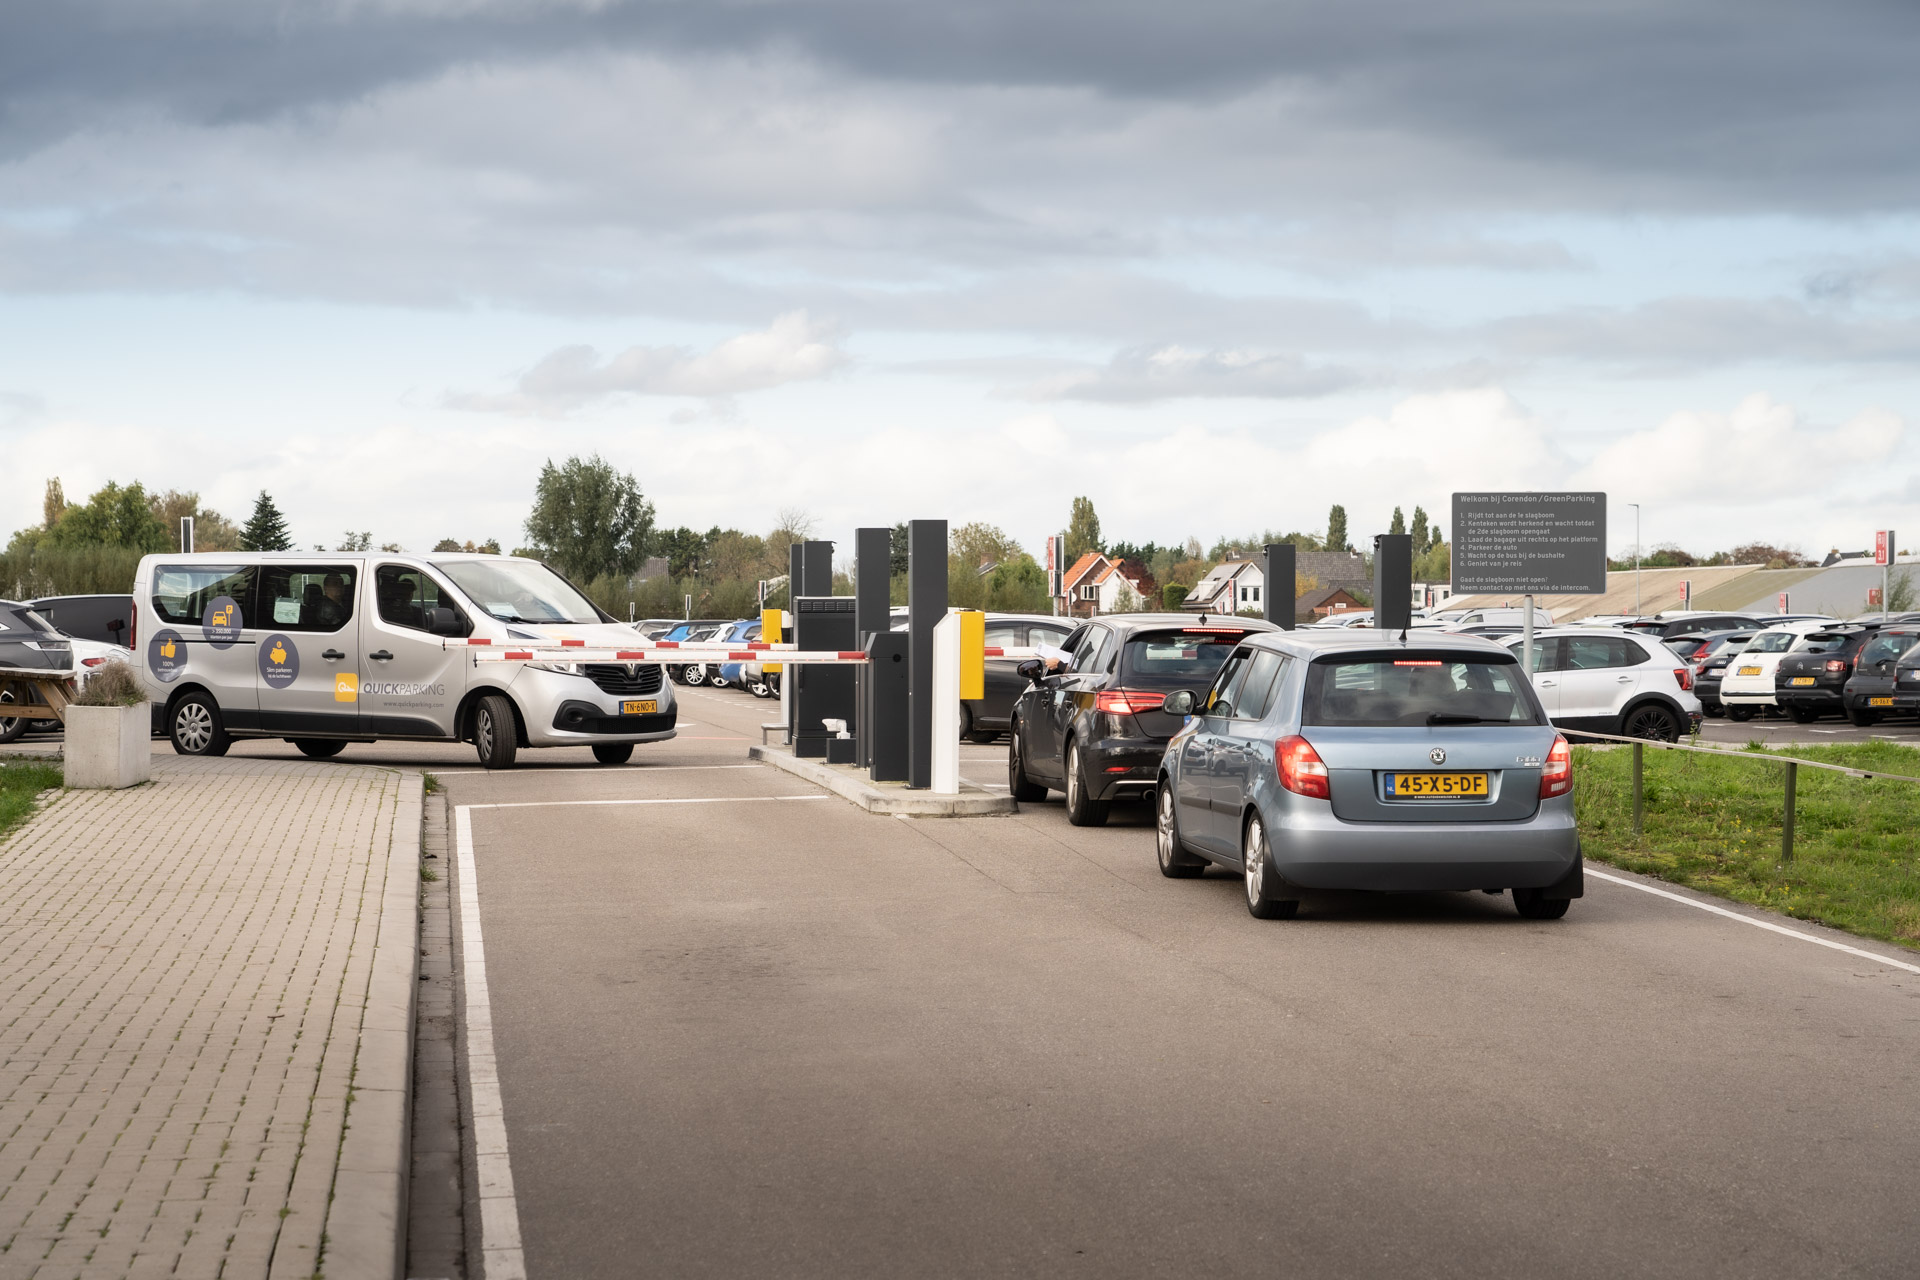 Parkimeter And Quick Parking Announce Partnership To Improve Parking Reservations In European Airports